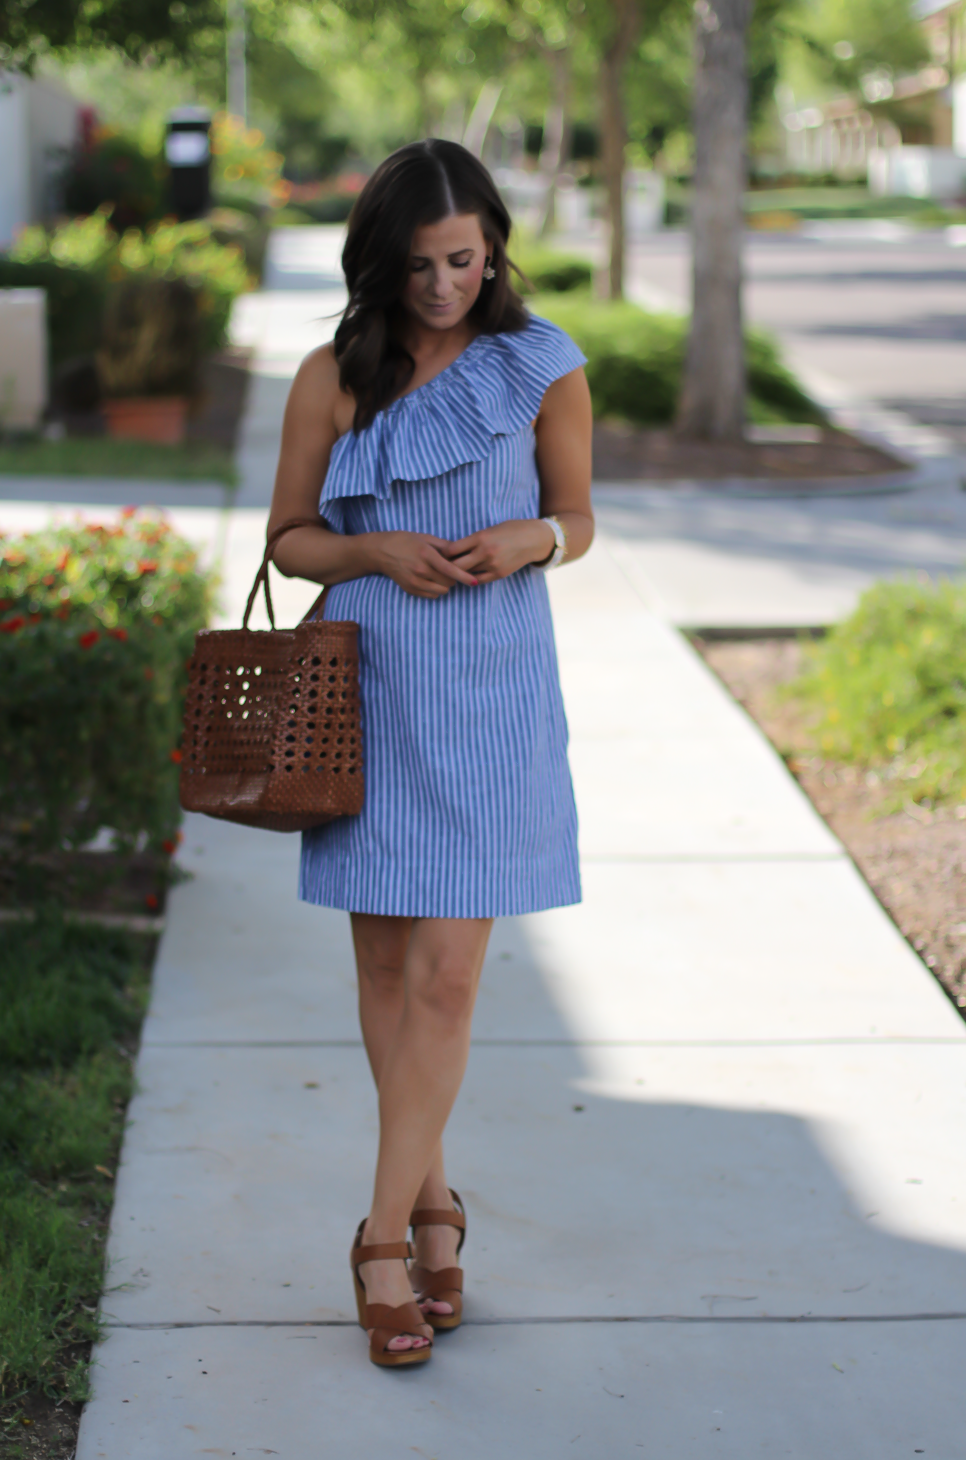 Striped One Shoulder Ruffle Dress, Cognac Leather Wedge Sandals, Leather Basket Tote, Madewell, J.Crew 12